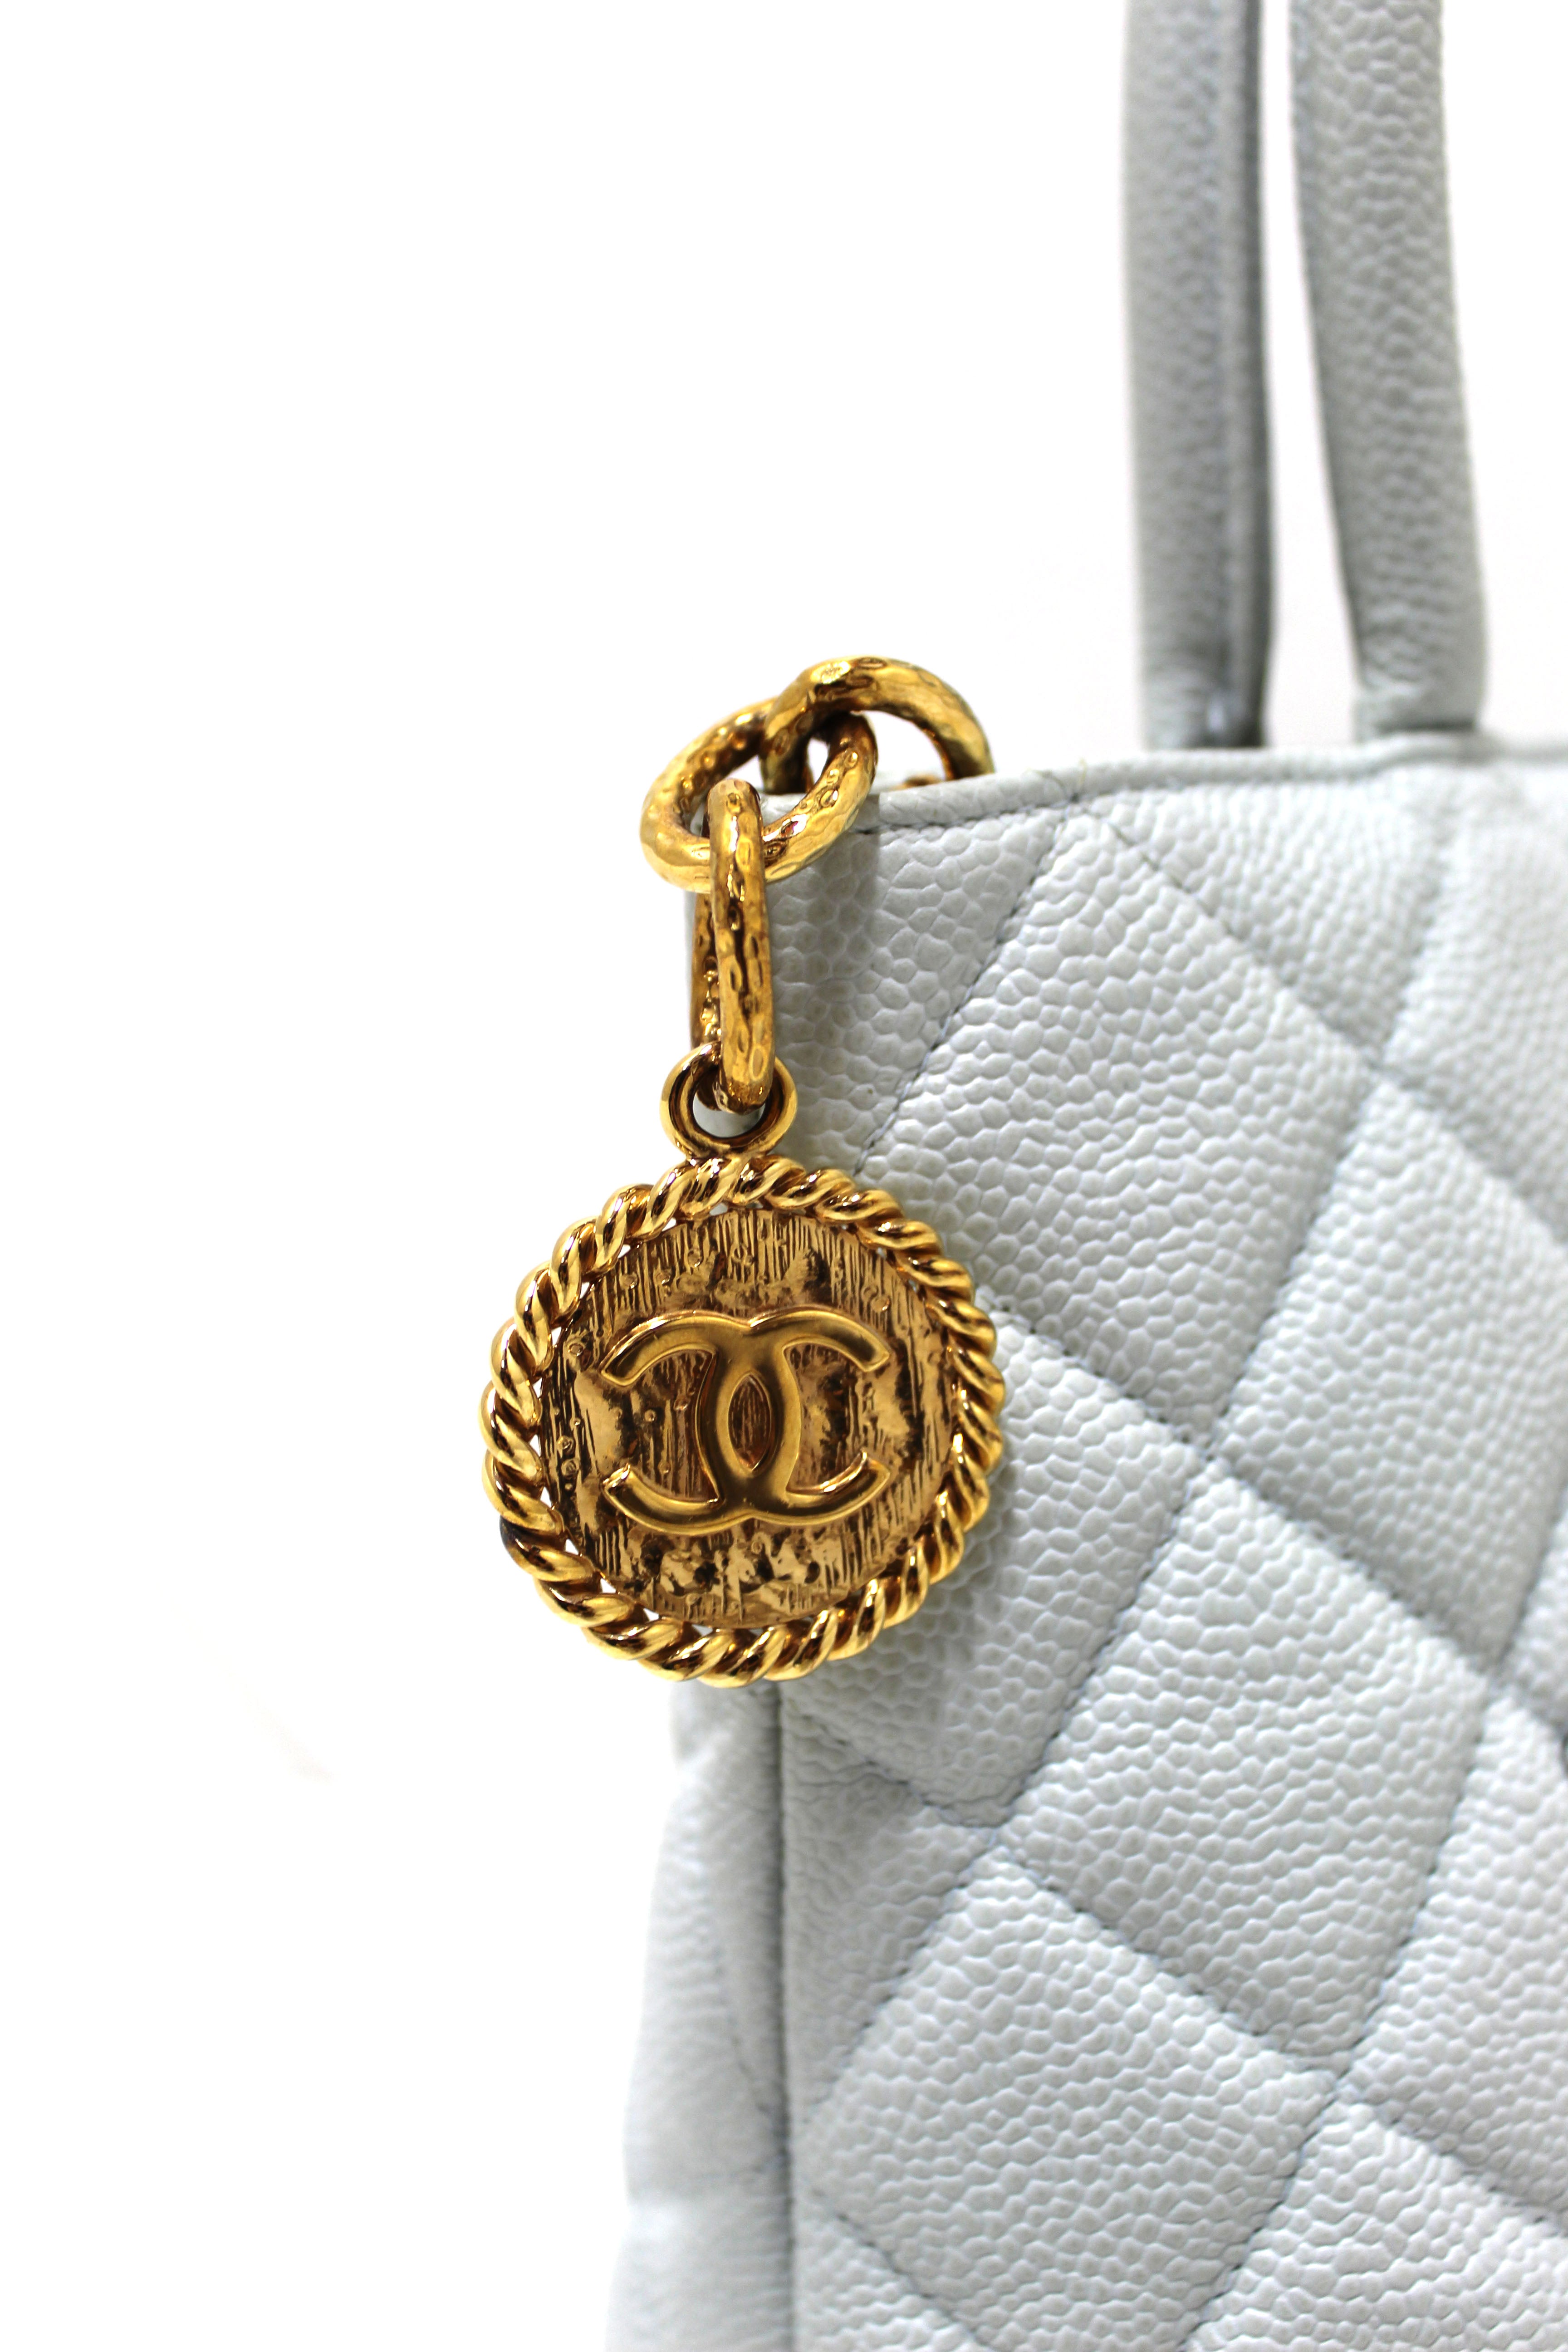 authentic chanel medallion tote